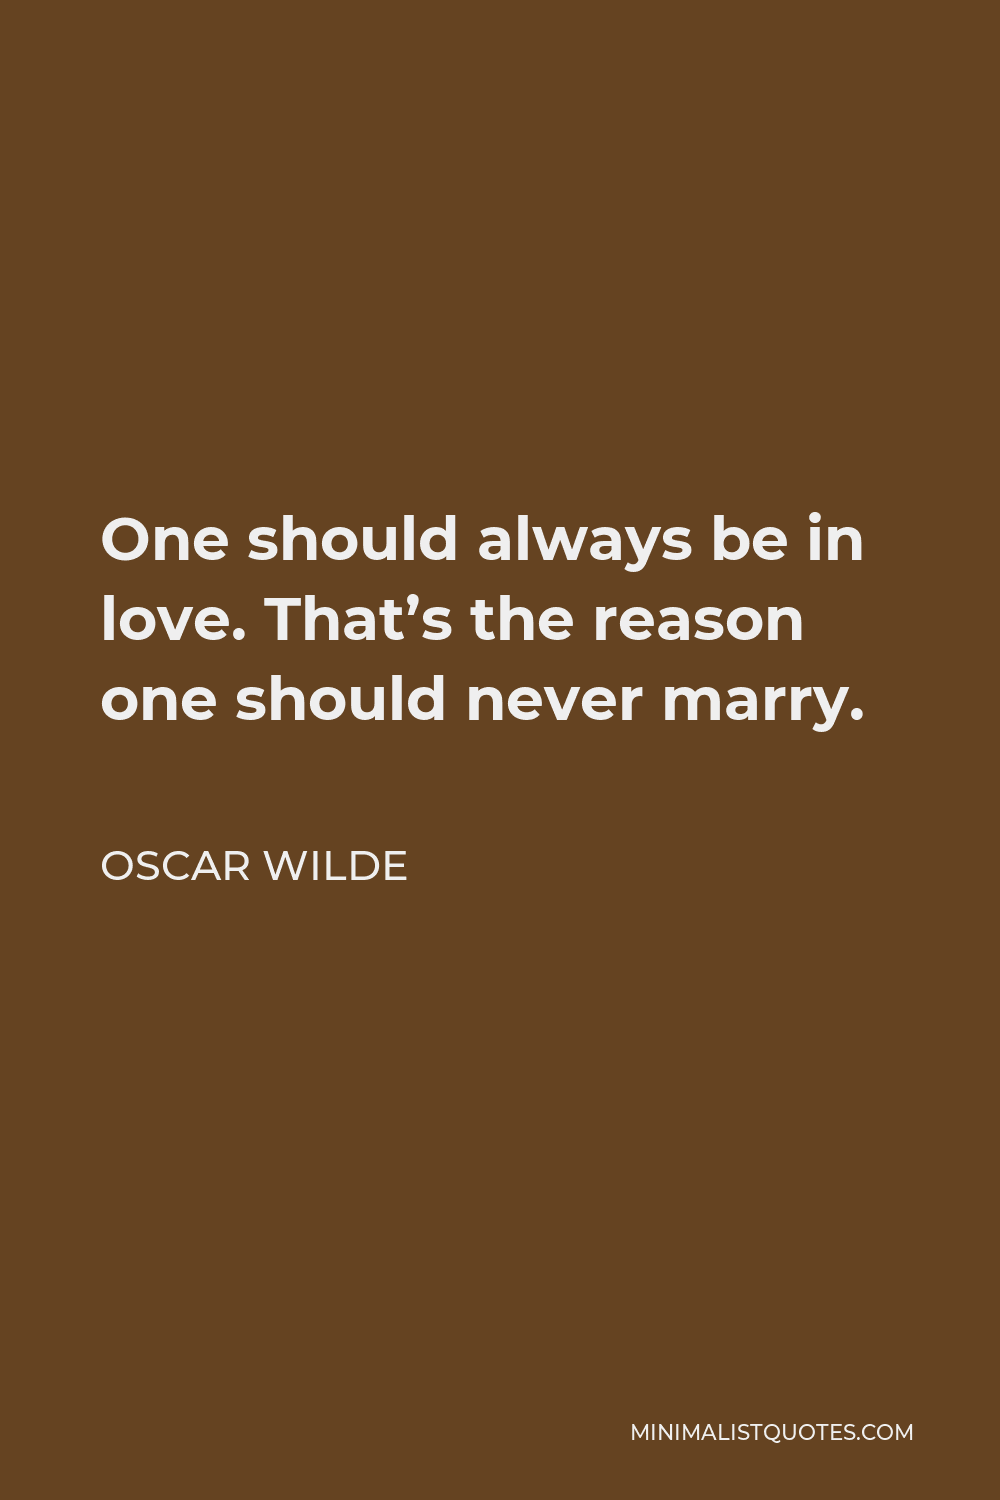 Oscar Wilde Quote - One should always be in love. That’s the reason one should never marry.